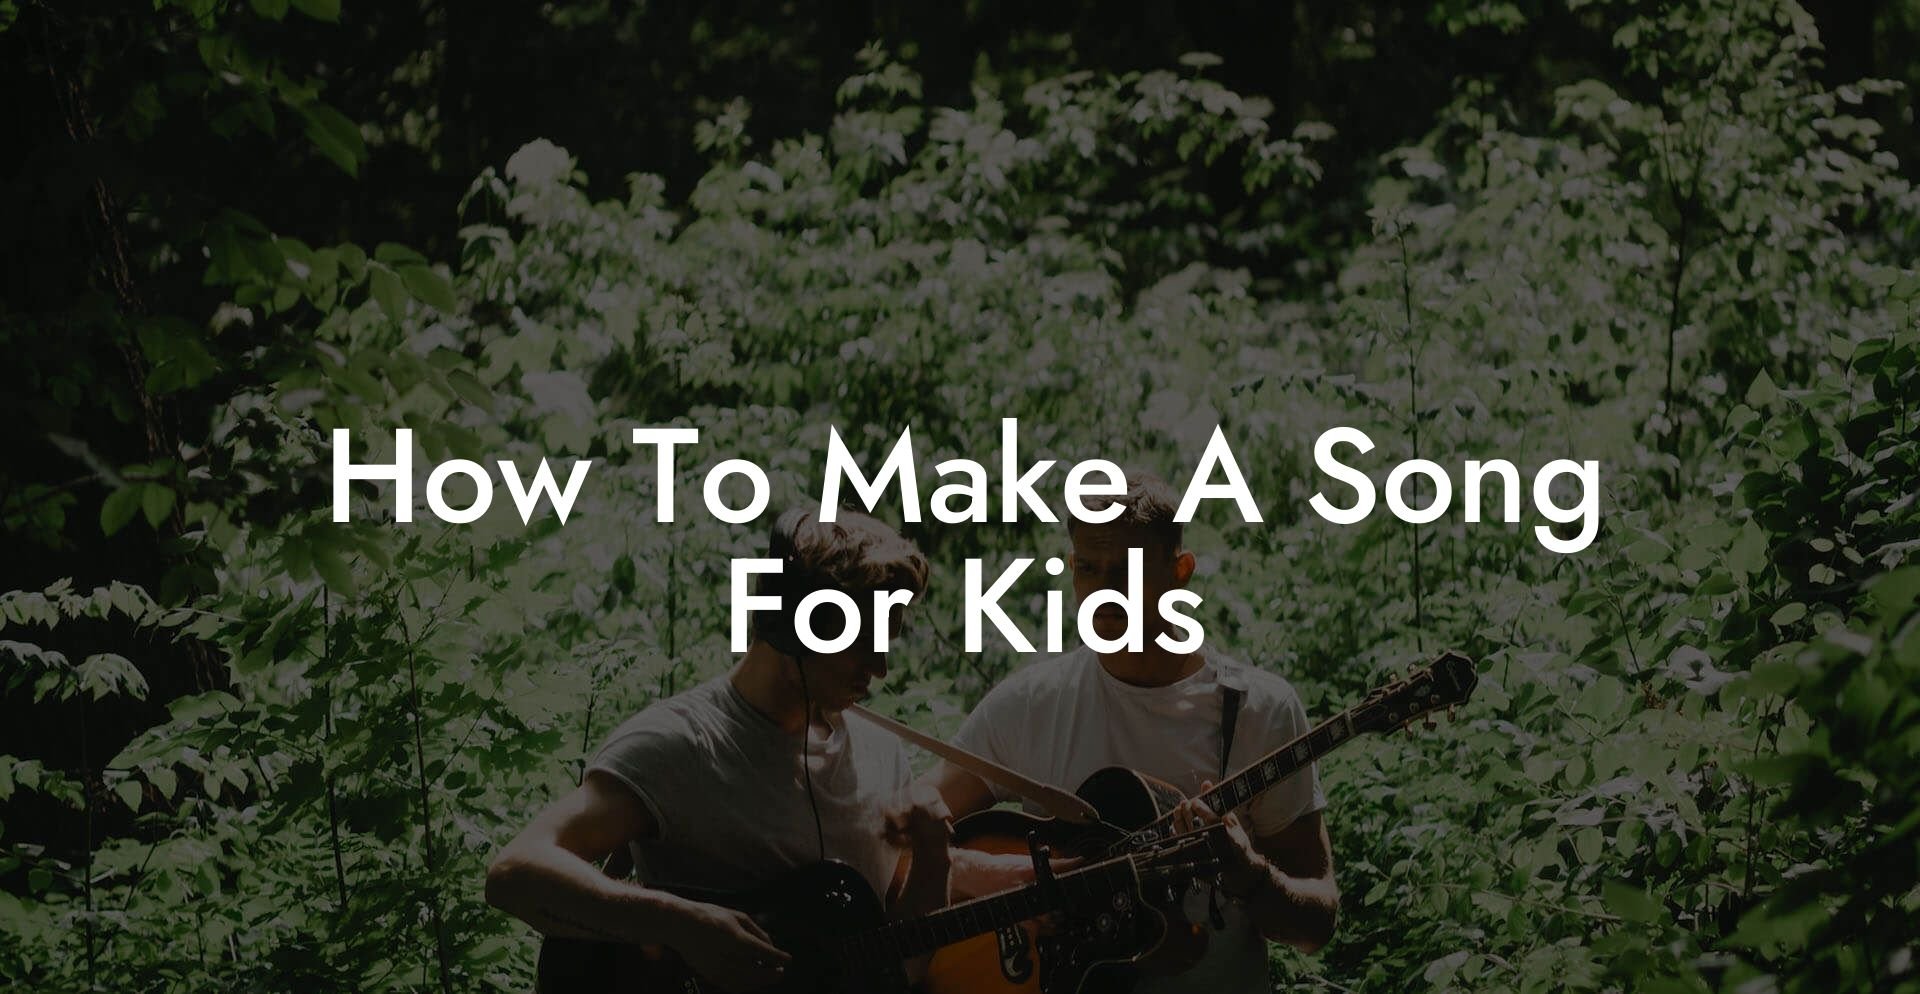 how to make a song for kids lyric assistant